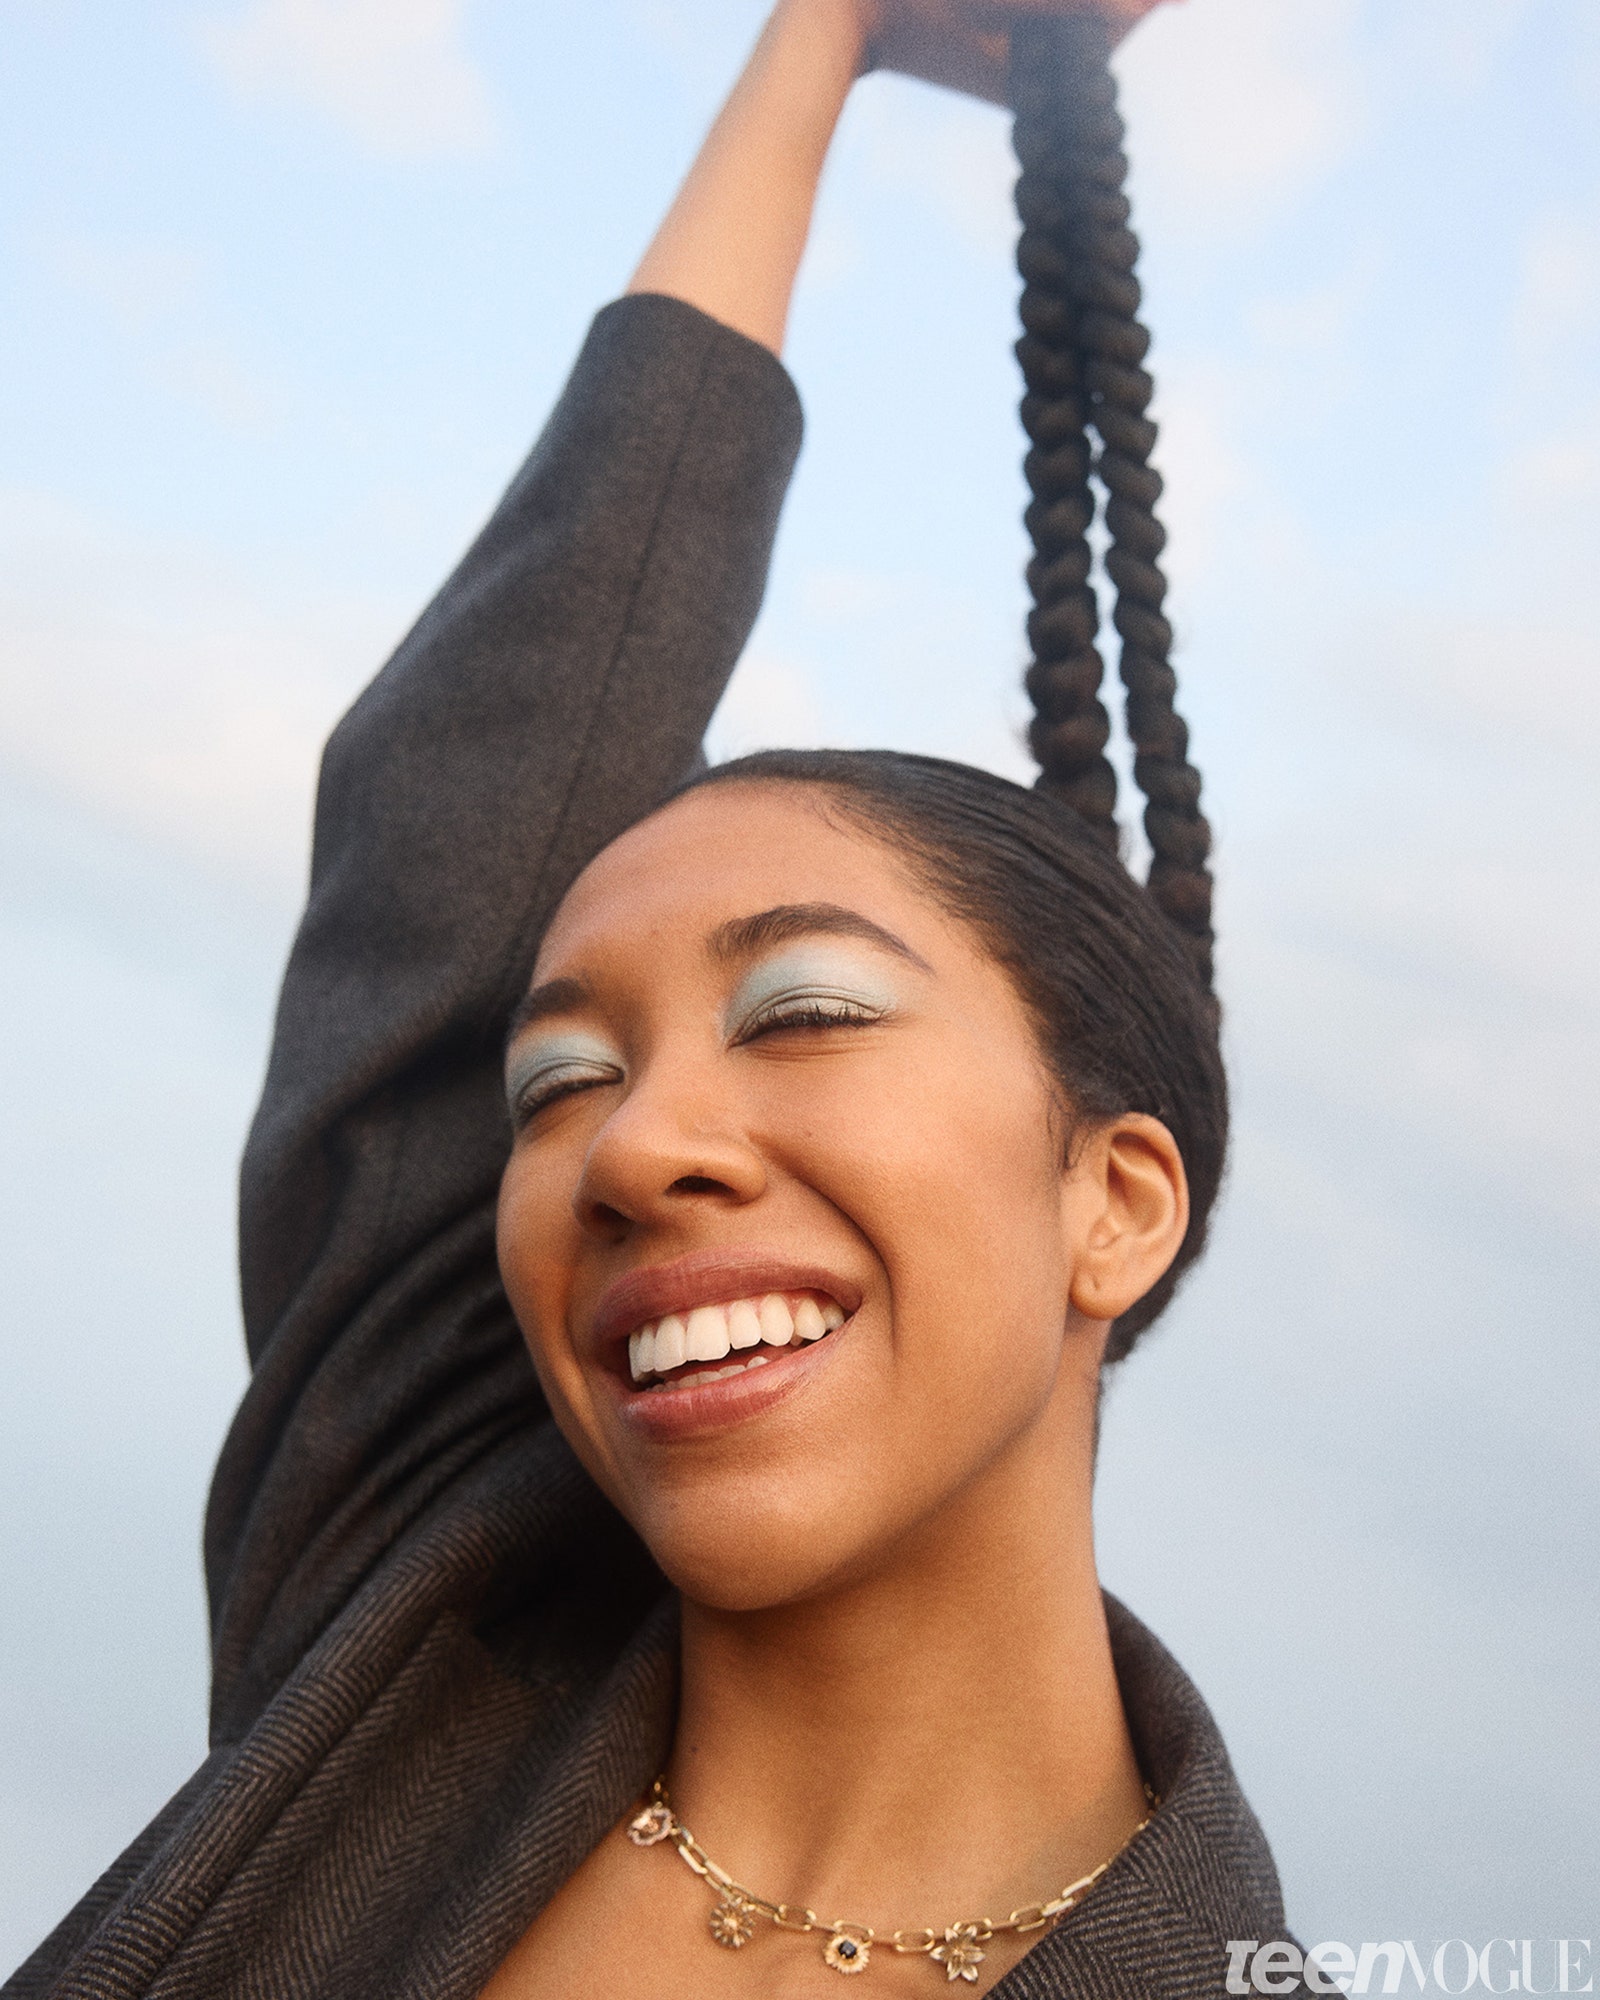 Aoki Lee Simmons smiling holding her ponytail up against the sky.